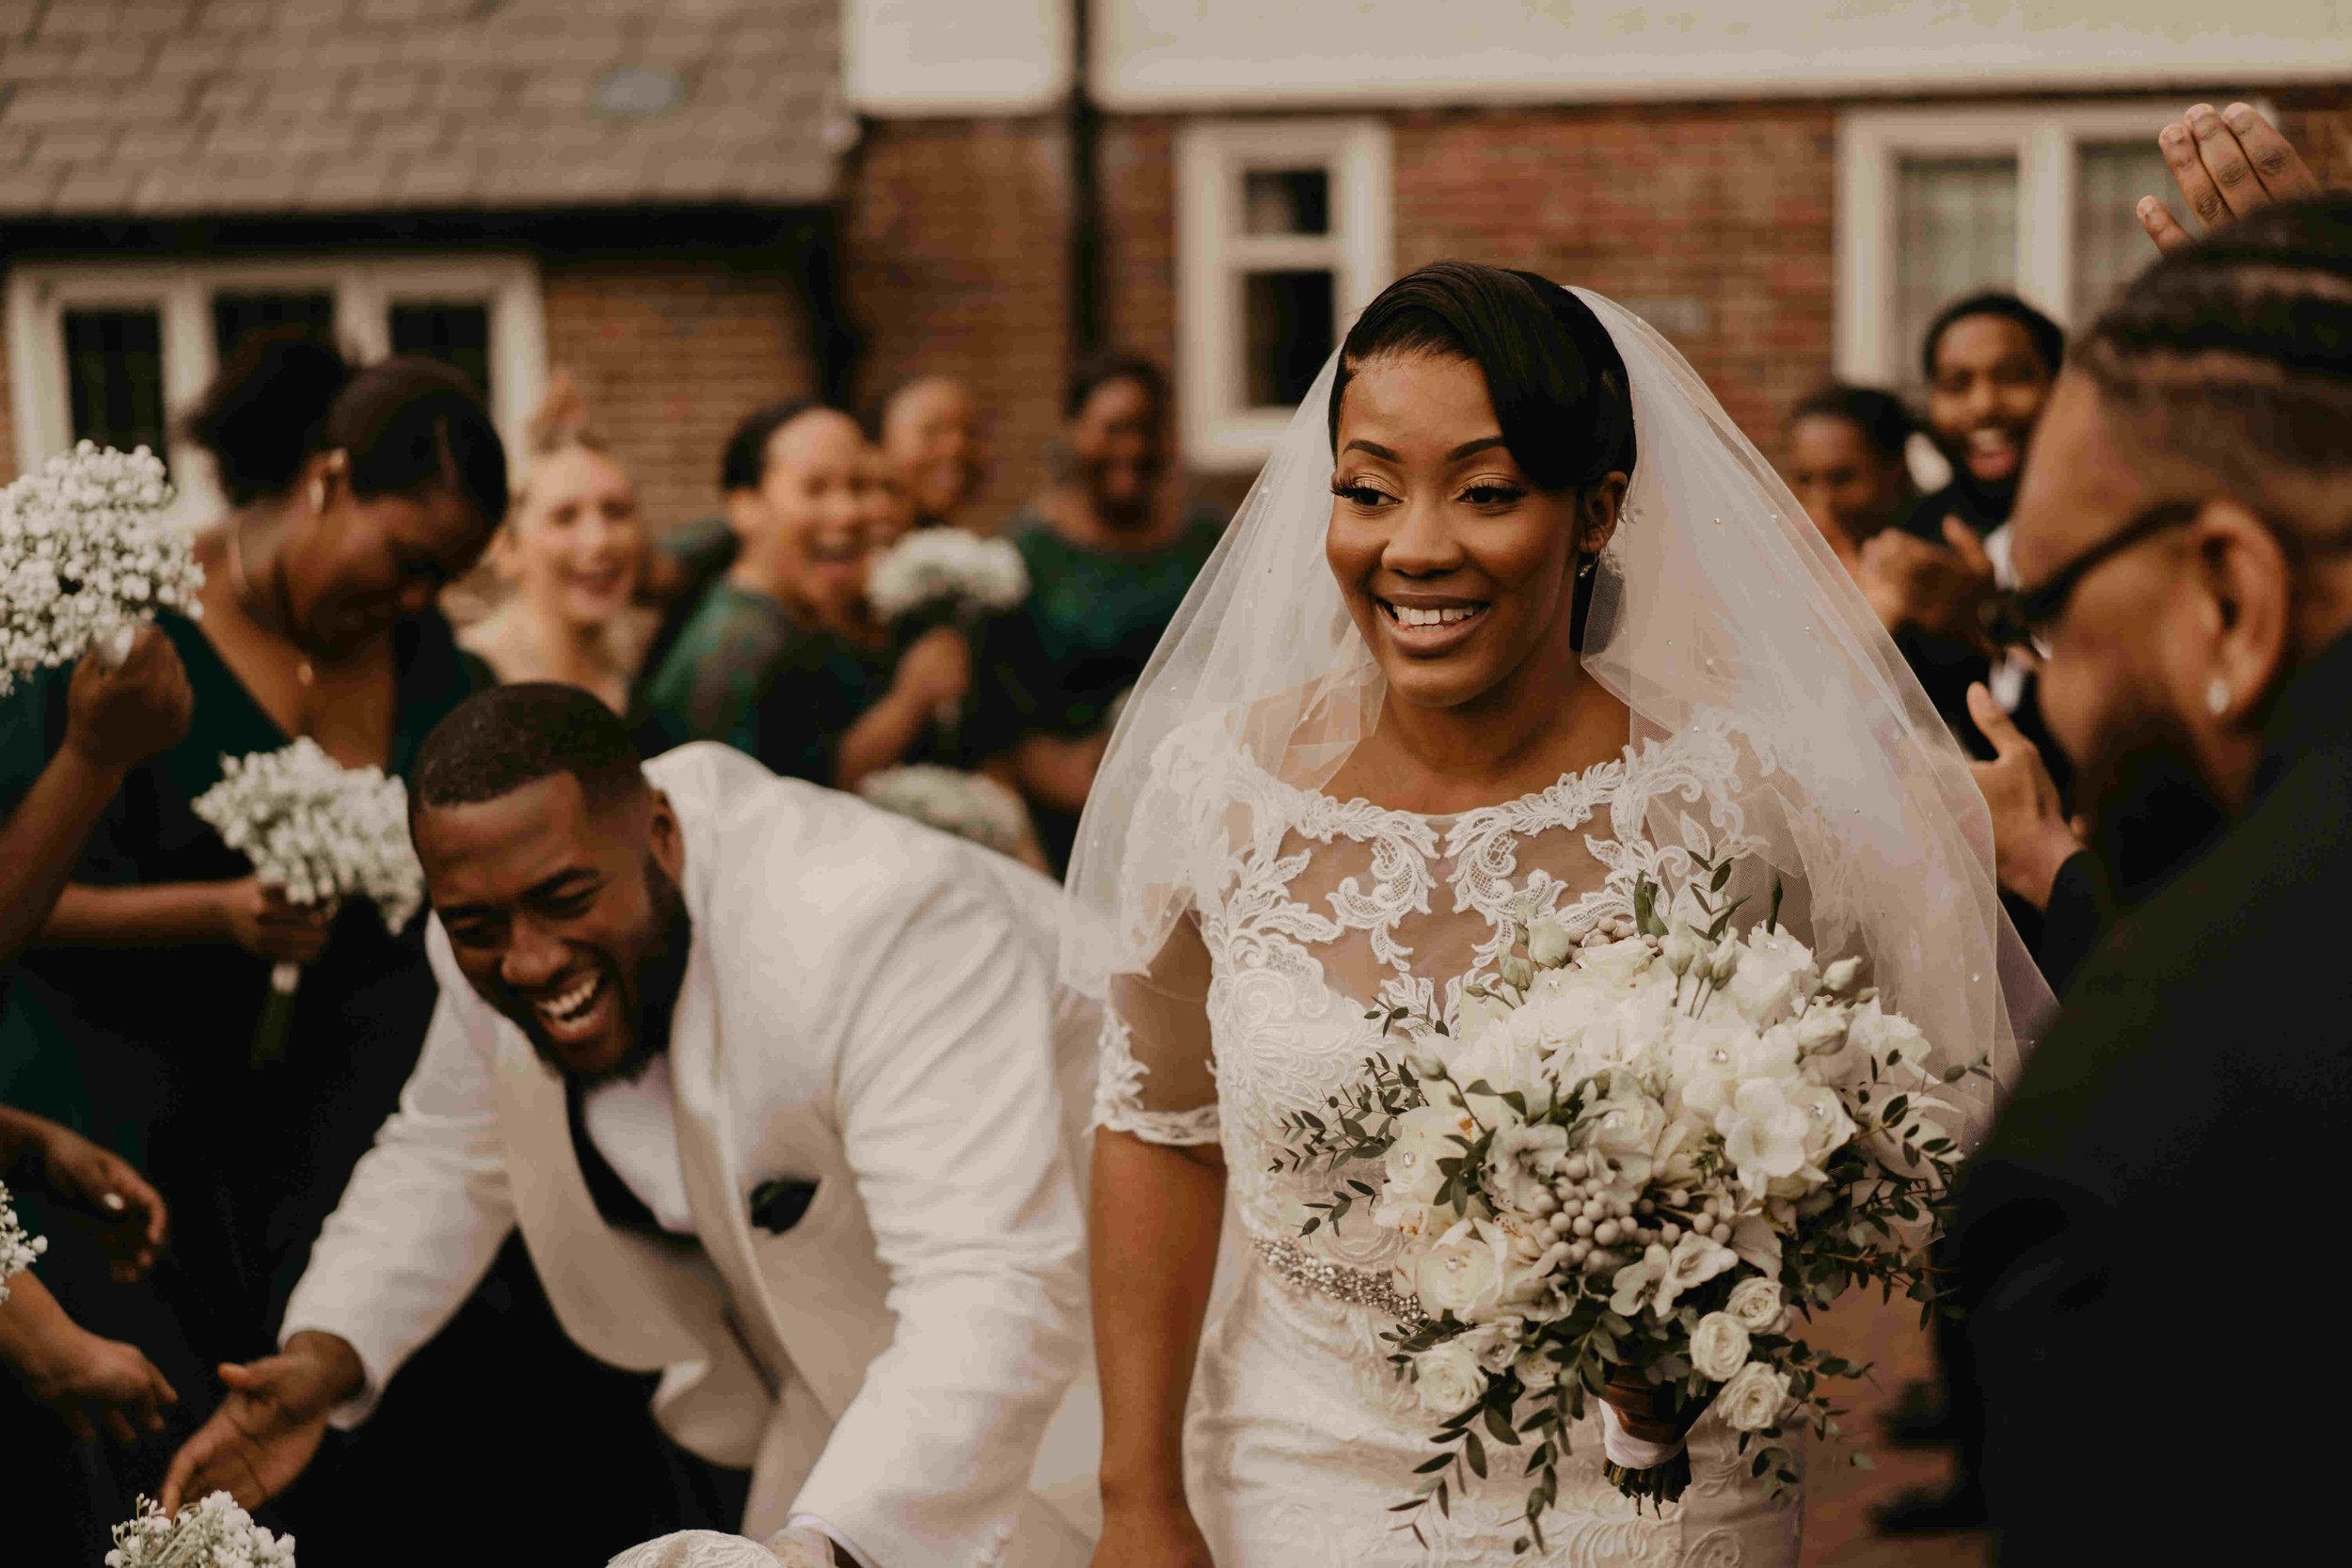  A Black bride and groom looking so happy on their wedding day. The bride has a big beautiful smile and is wearing a veil and a lace dress. The groom is wearing a white jacket and is crouching down slightly. 